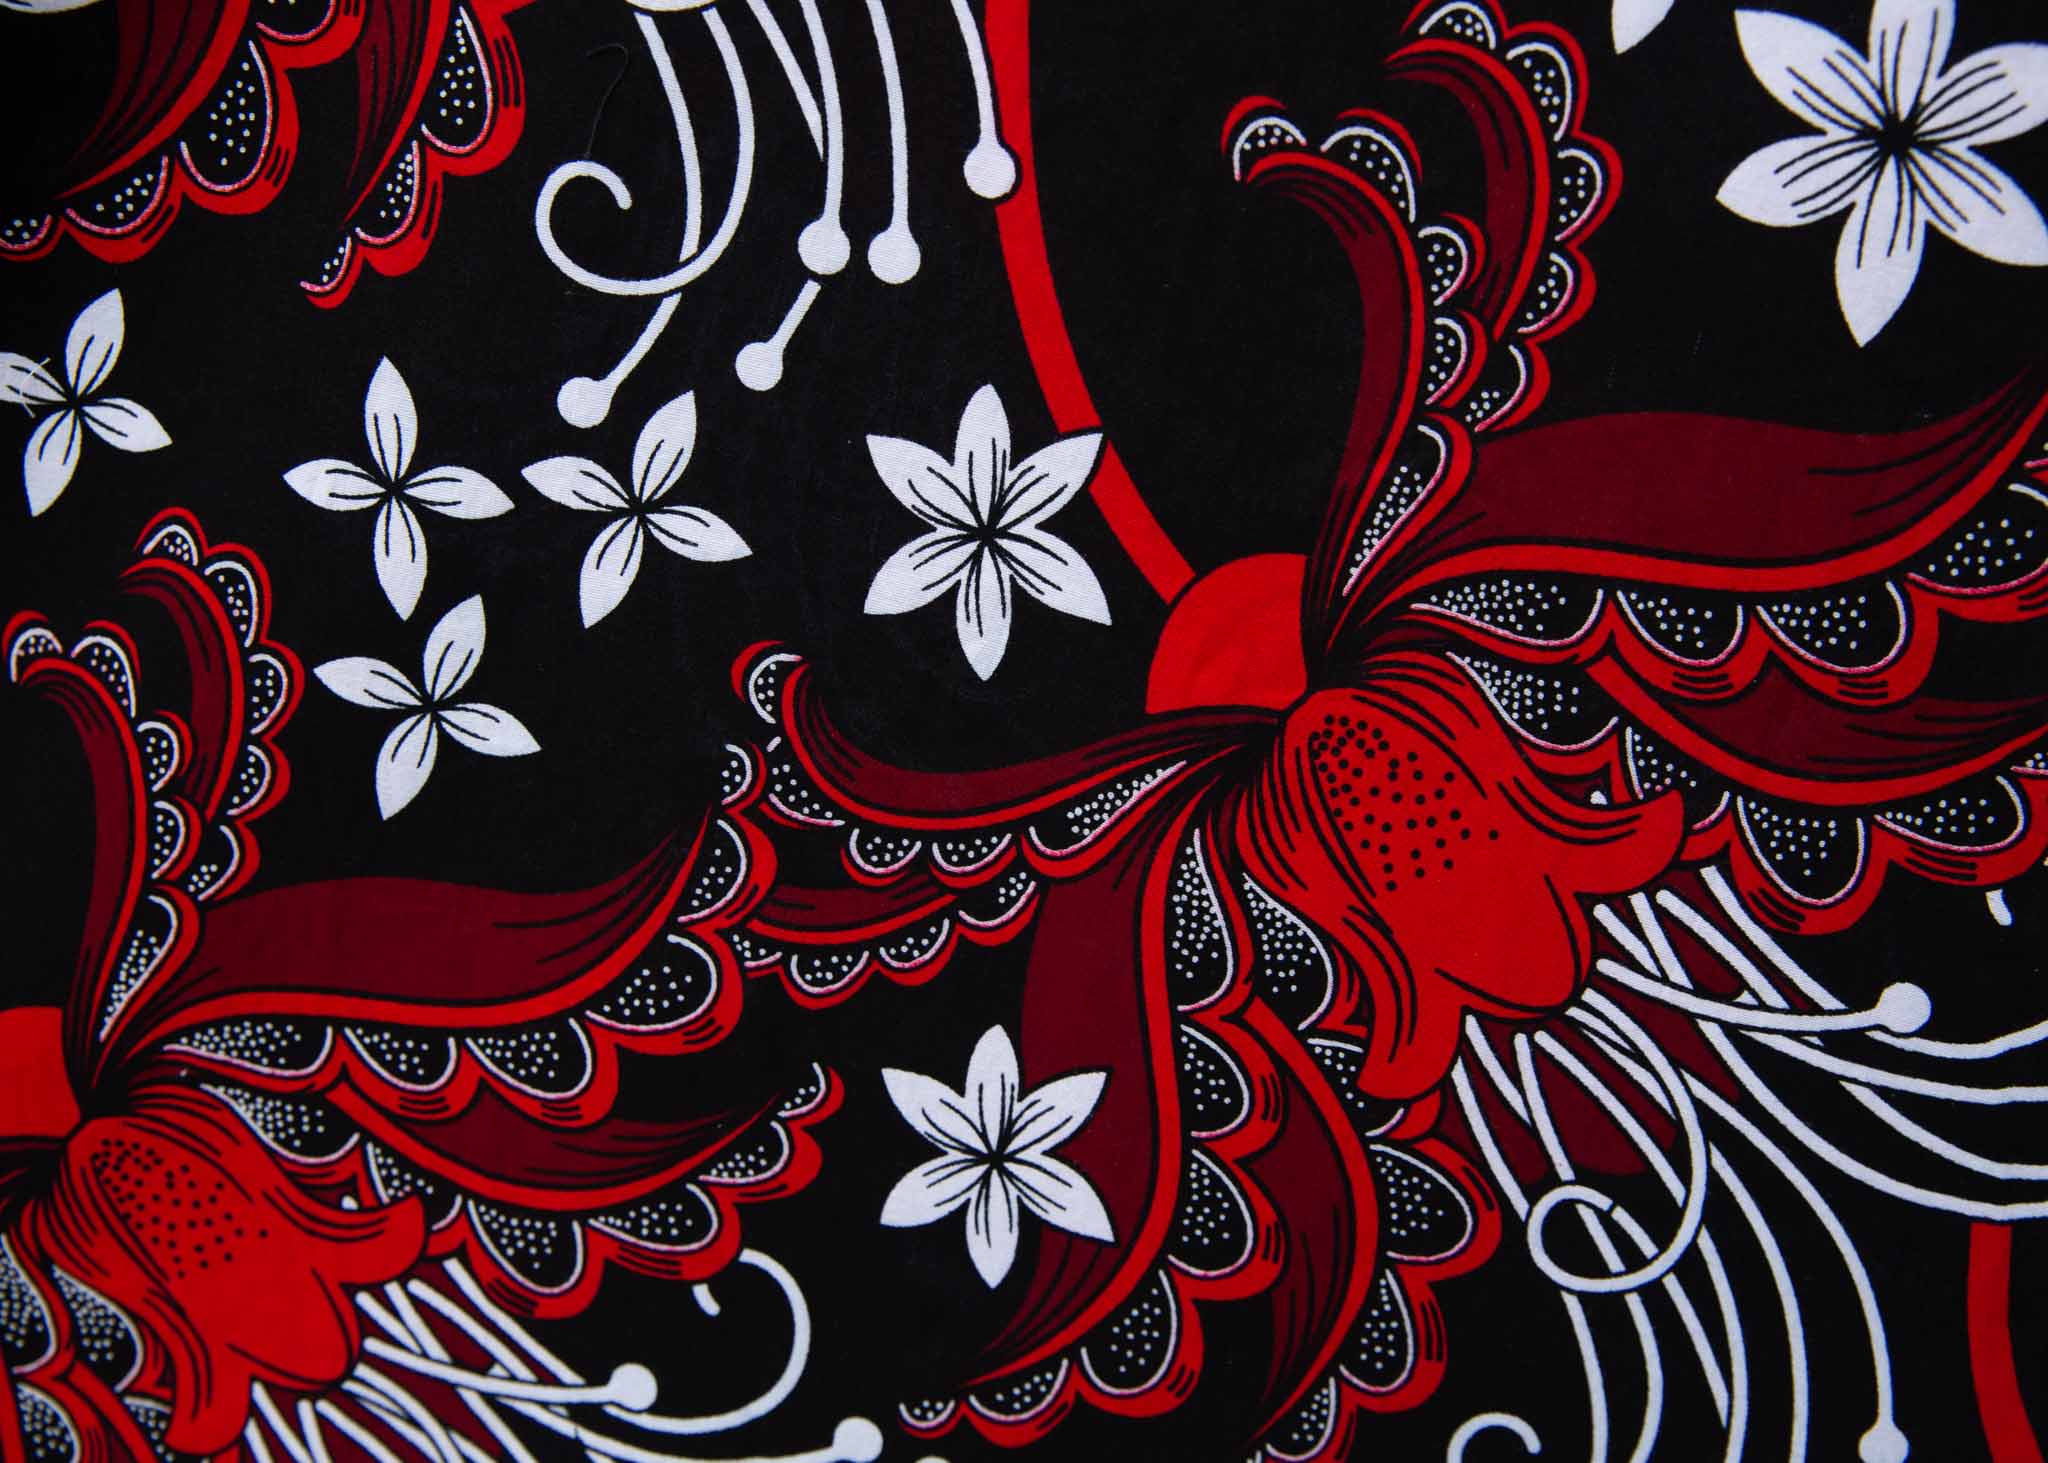 Display of black dress with red and white flowers, fabric.